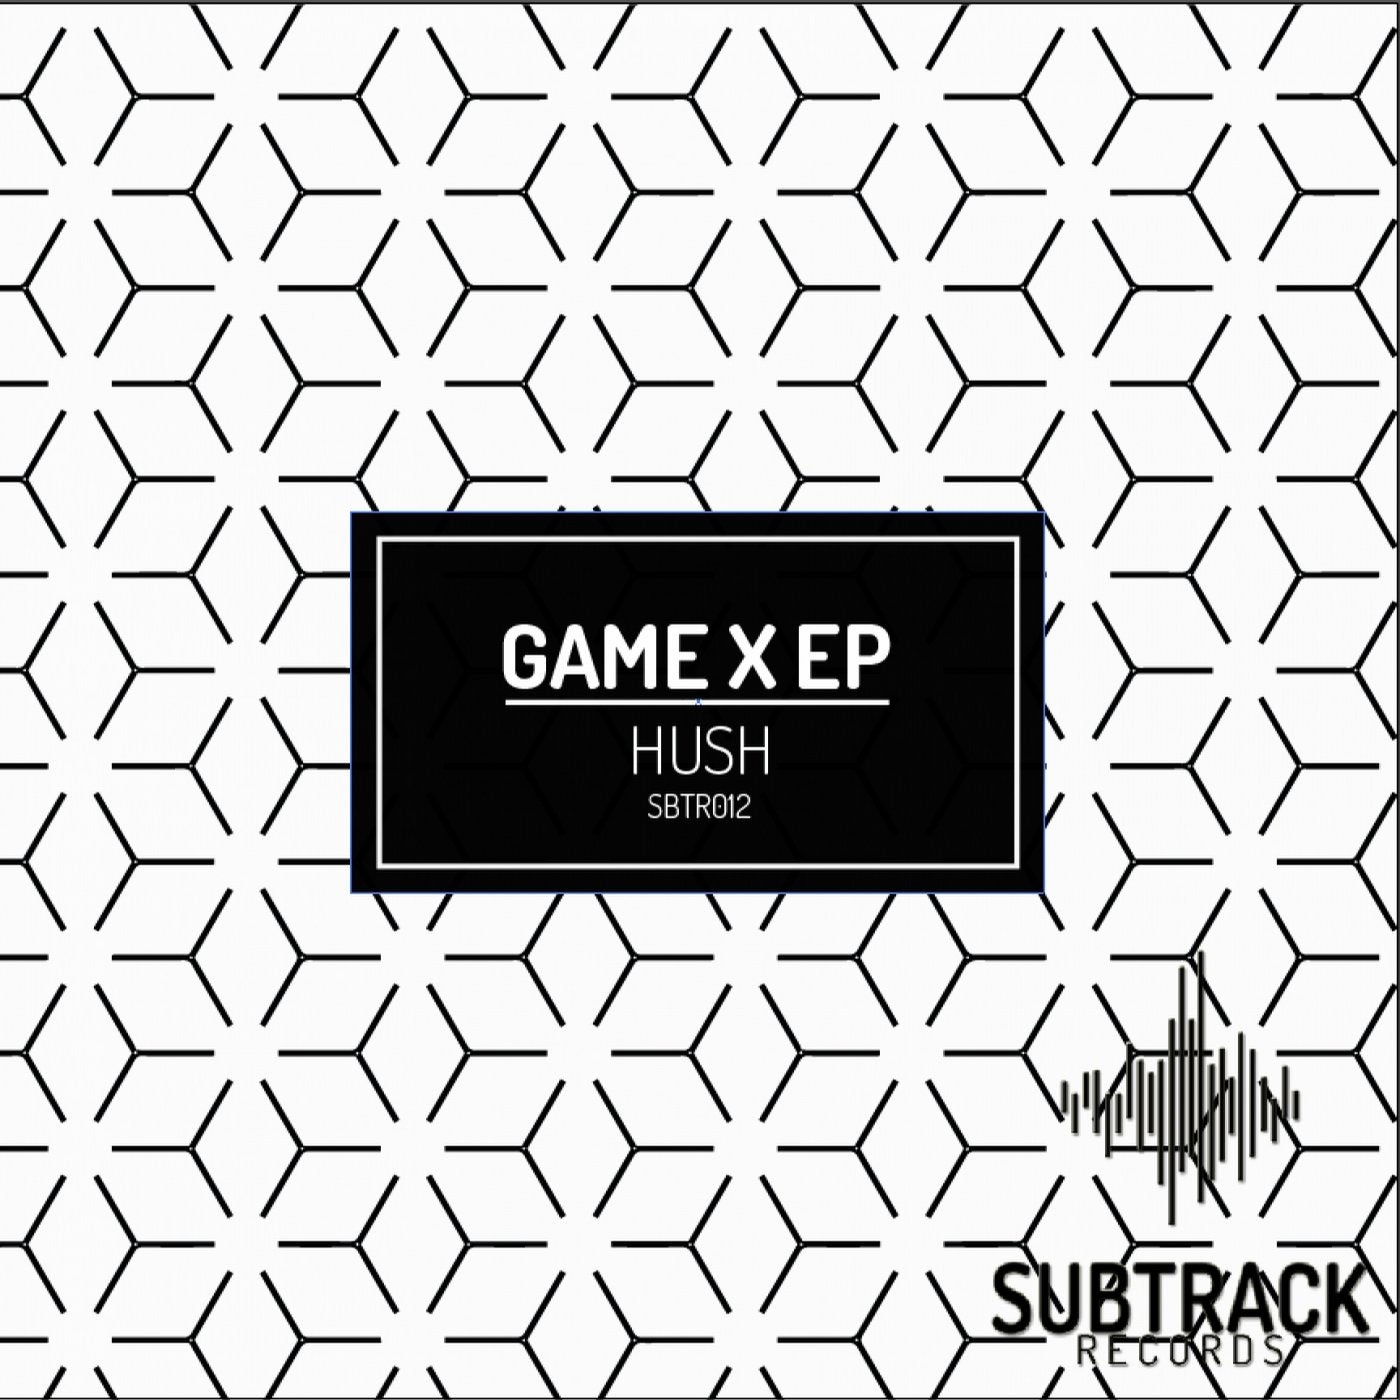 Game X EP